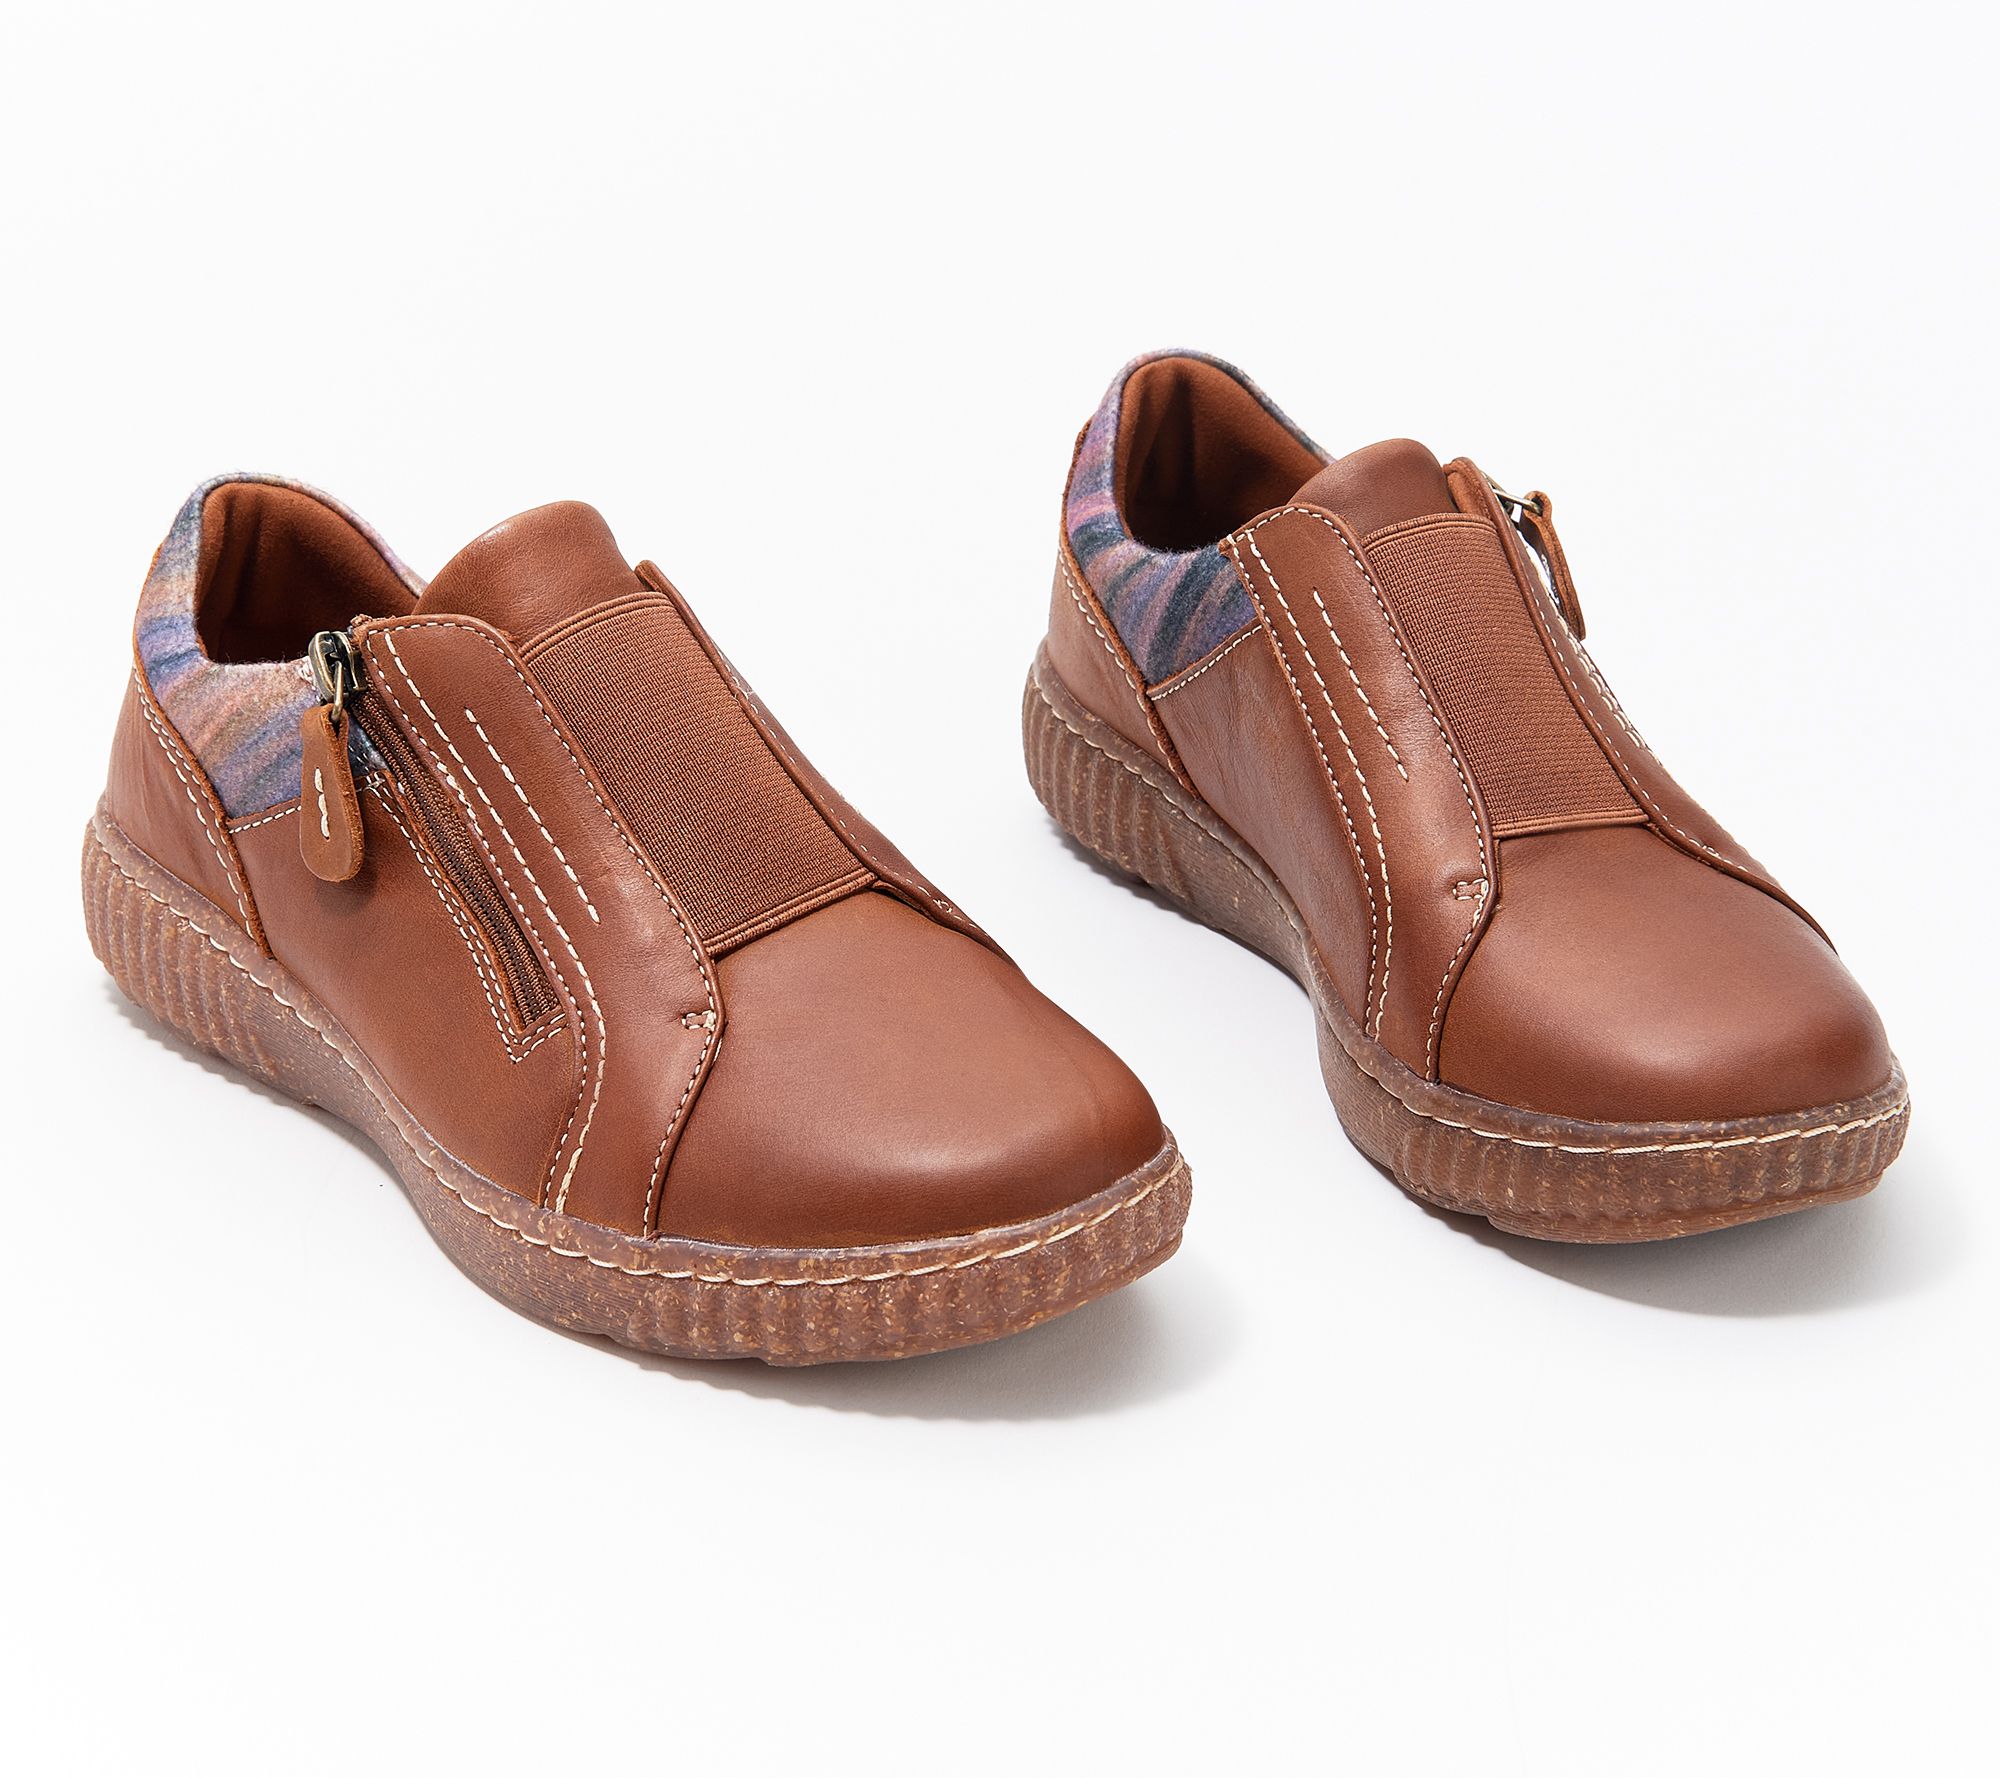 Clarks Collection Leather Slip-Ons - Caroline Cove -